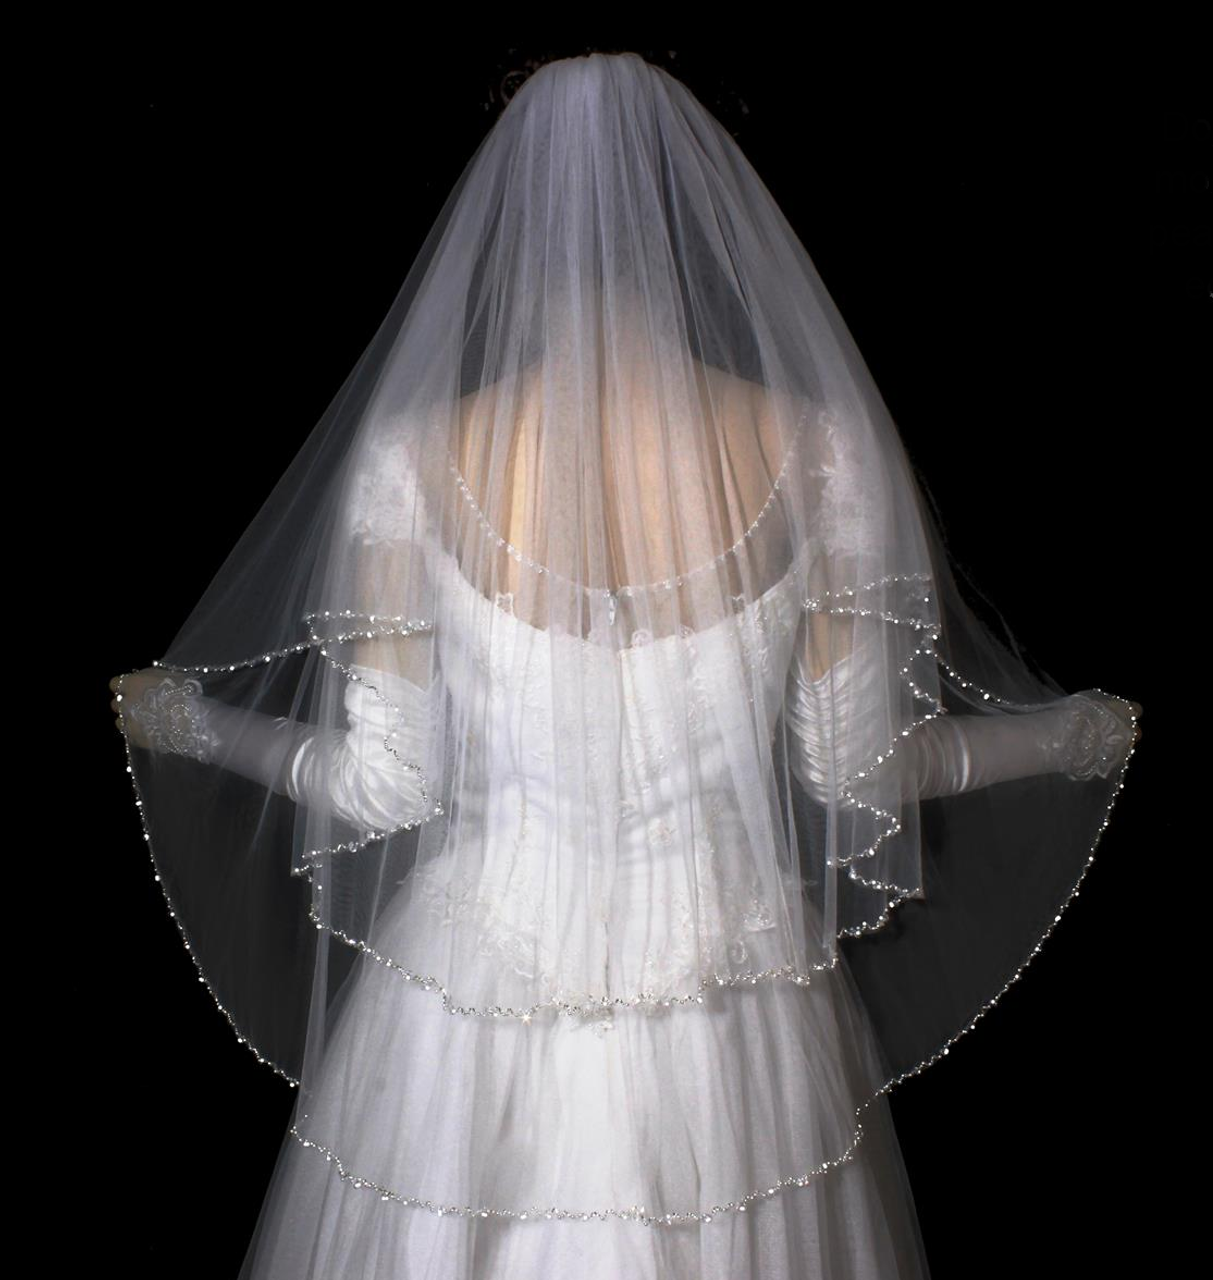 https://cdn11.bigcommerce.com/s-zb3qt33o/images/stencil/1280x1280/products/17237/60879/Two-Layer-Pearl-and-Crystal-Beaded-Fingertip-Length-Wedding-Veil_34319__48656.1689517178.png?c=2